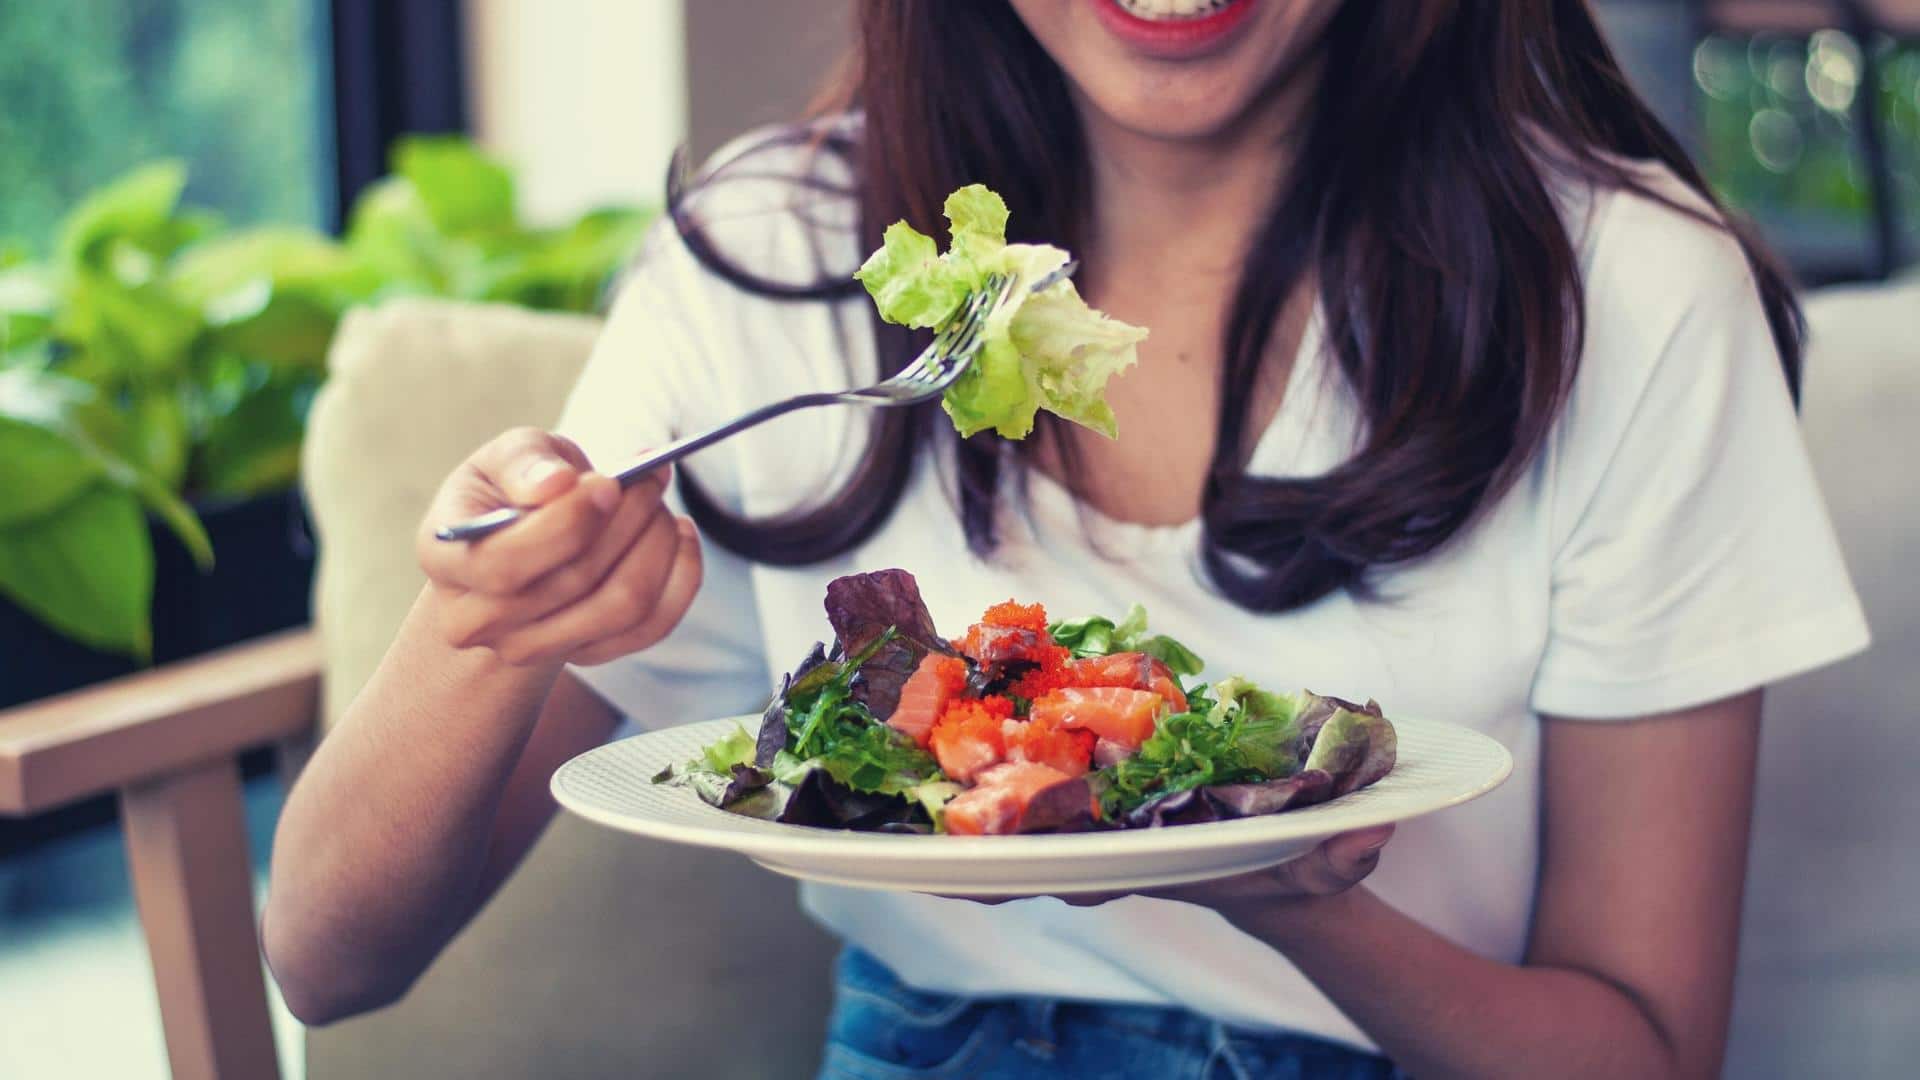 5 healthy eating habits you should definitely adopt in 2023